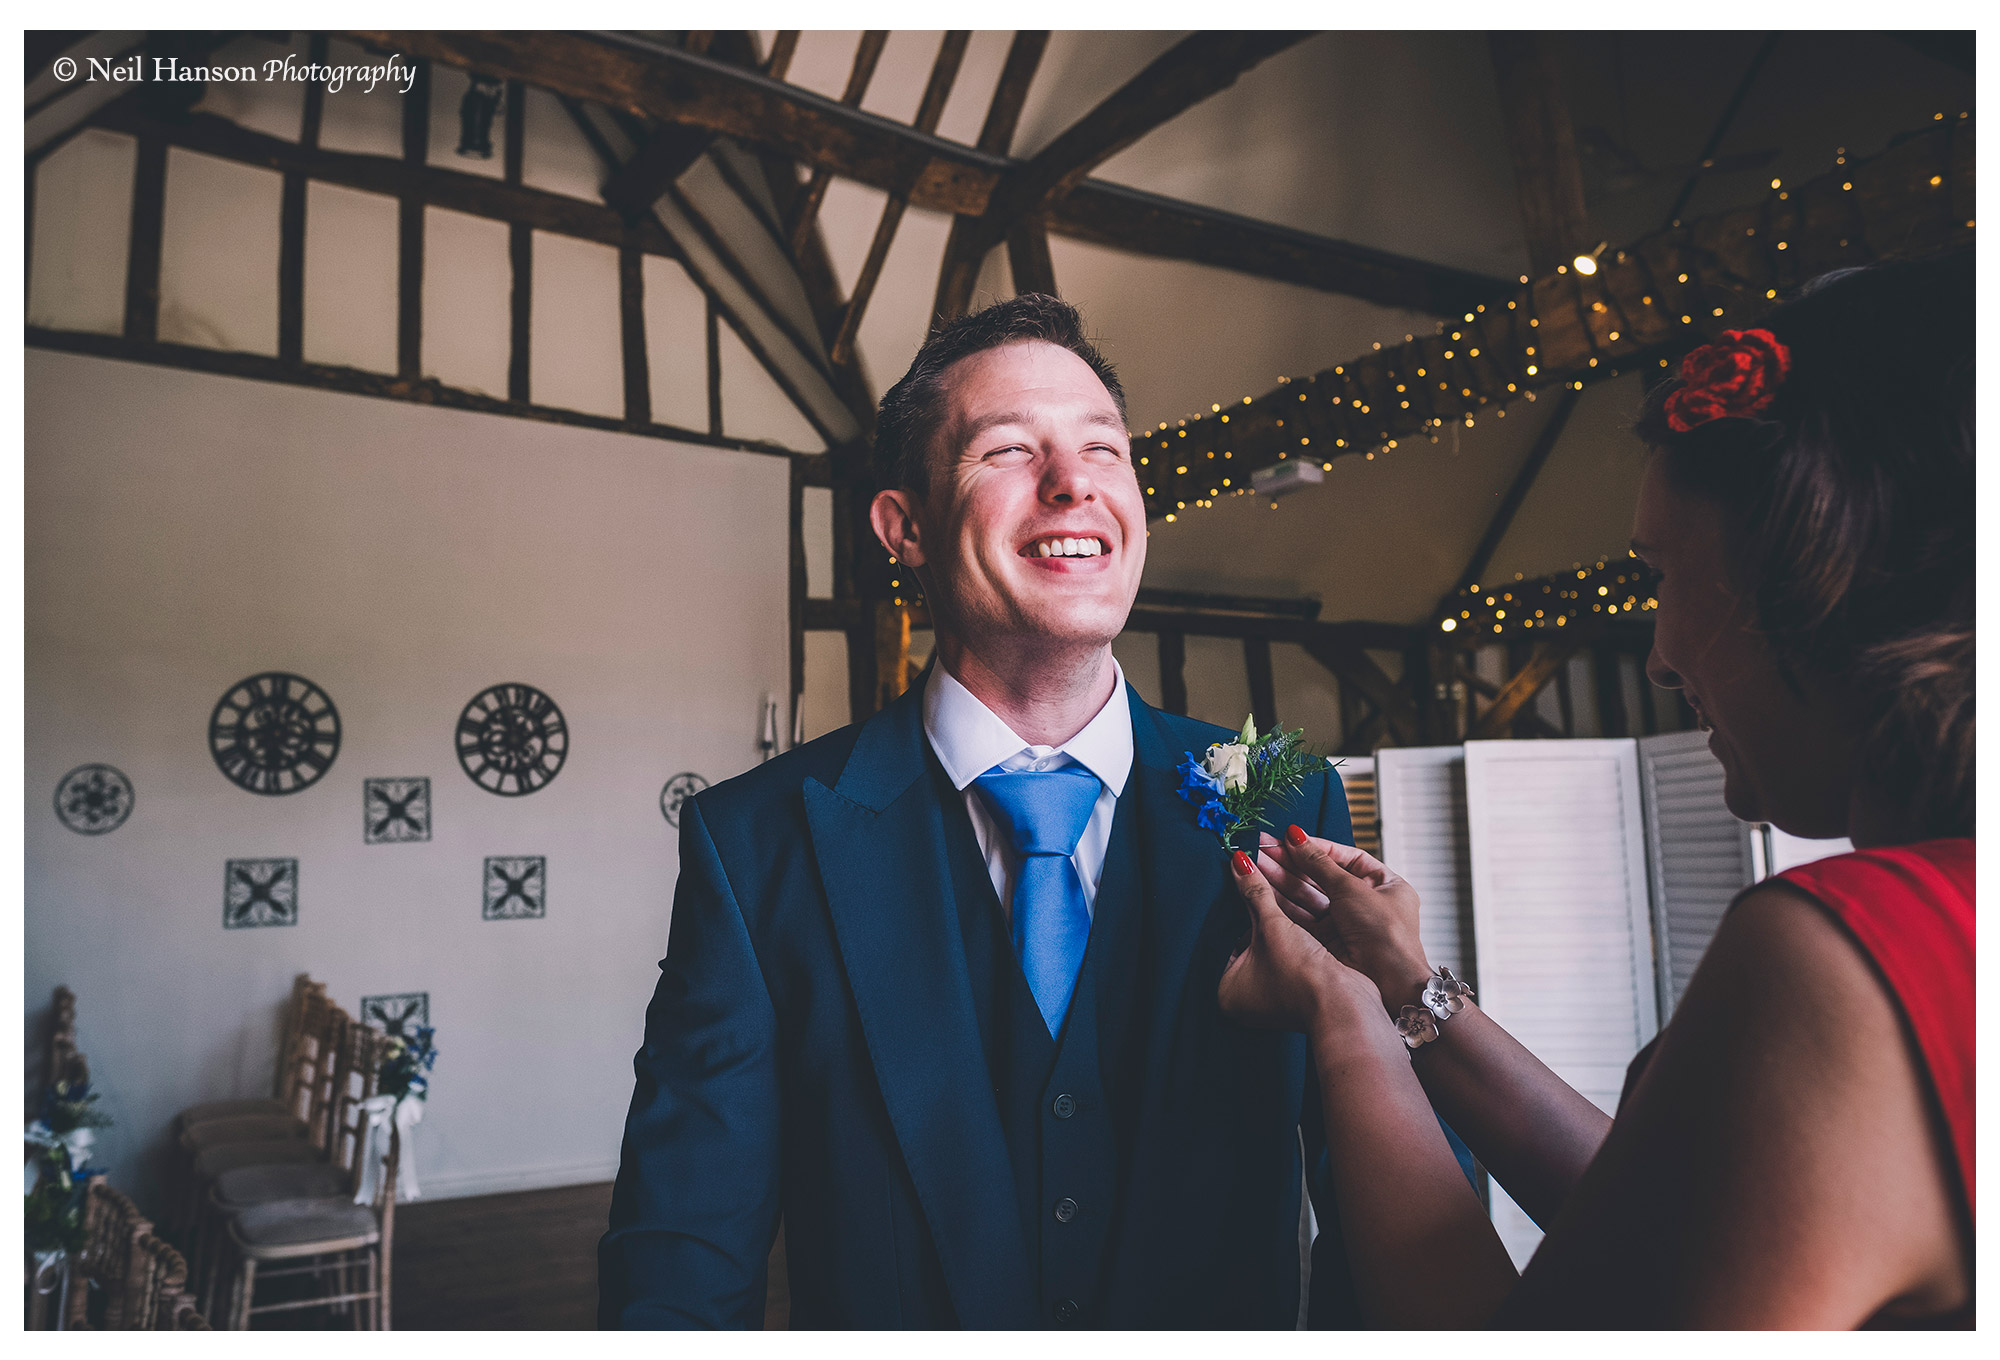 Best Man at a Wedding at Old Luxters Barn in the Chilterns